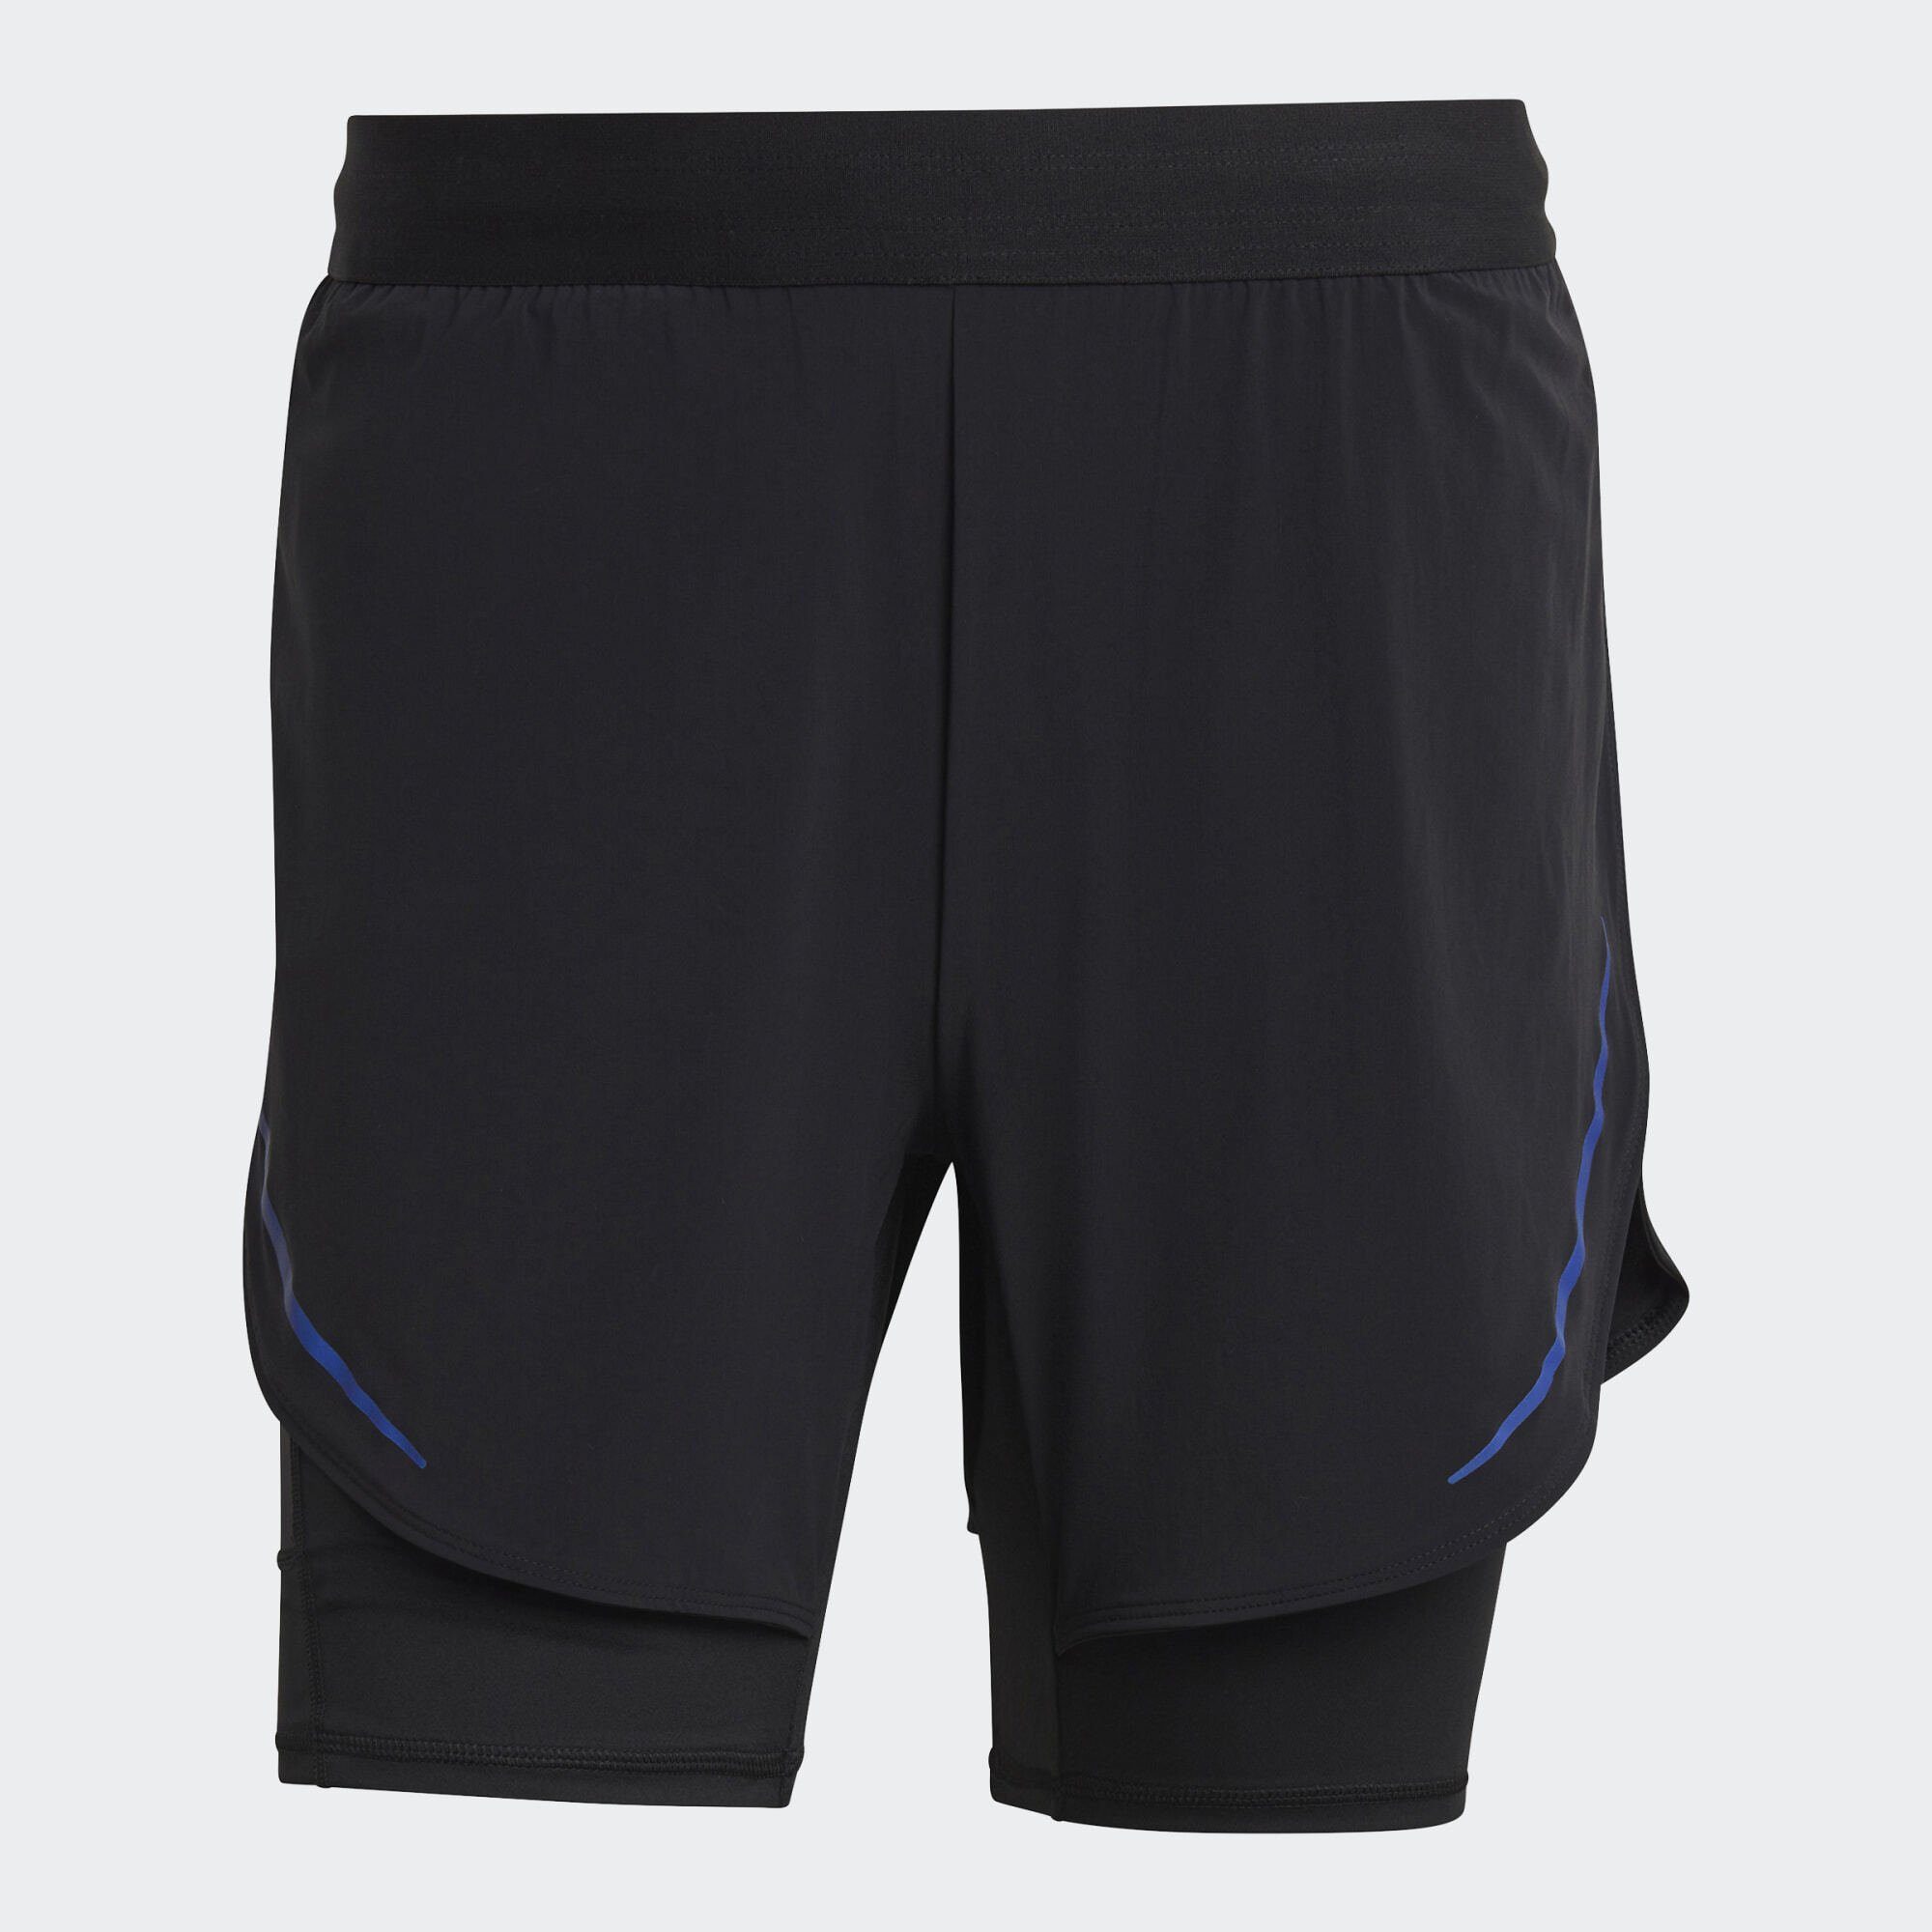 TRAINING 2-in-1-Shorts HIIT adidas 2-IN-1 Performance Black HEAT.RDY SHORTS